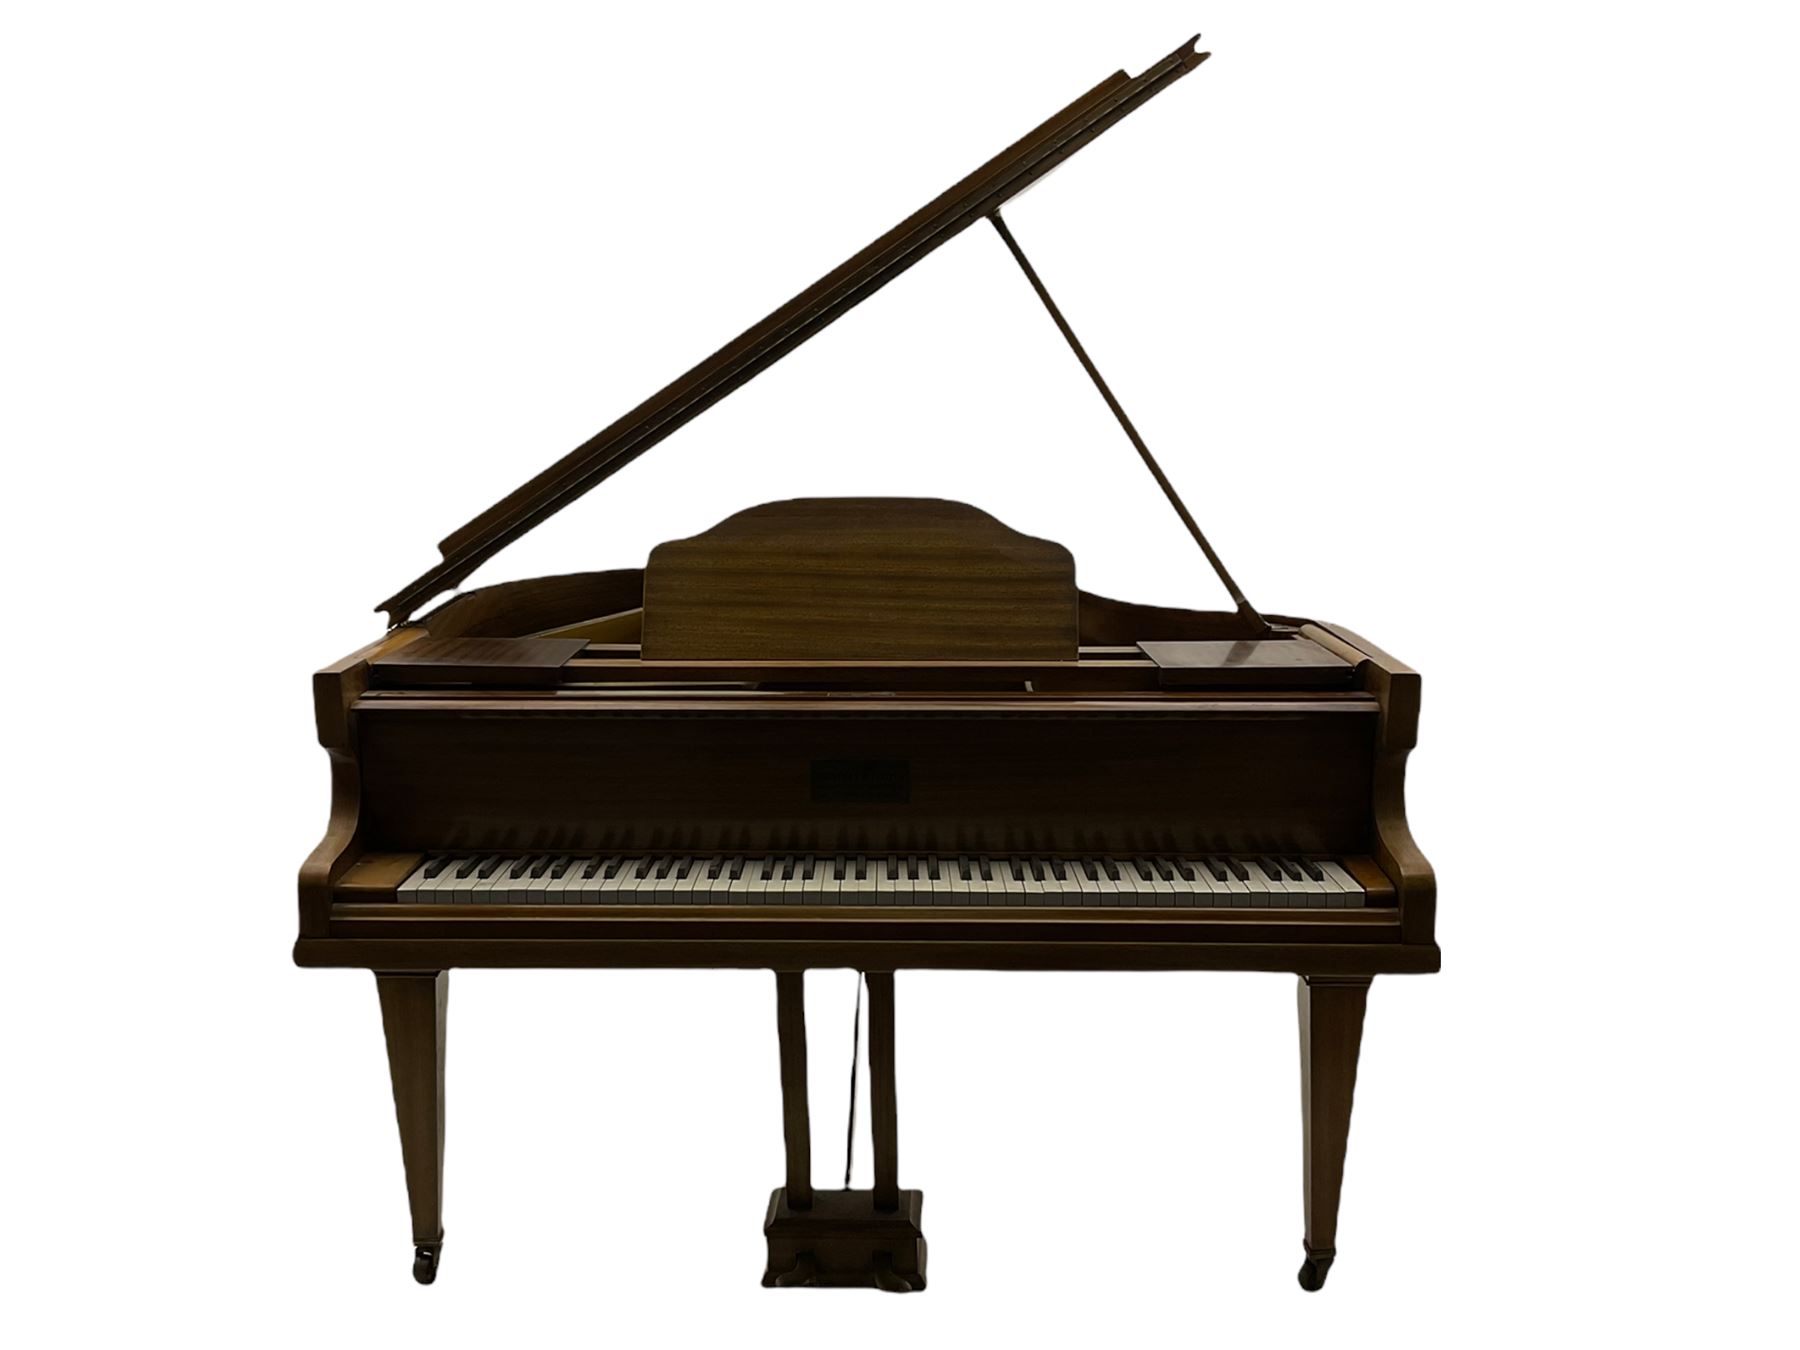 Brindley & Foster mahogany cased baby grand piano - Image 7 of 10